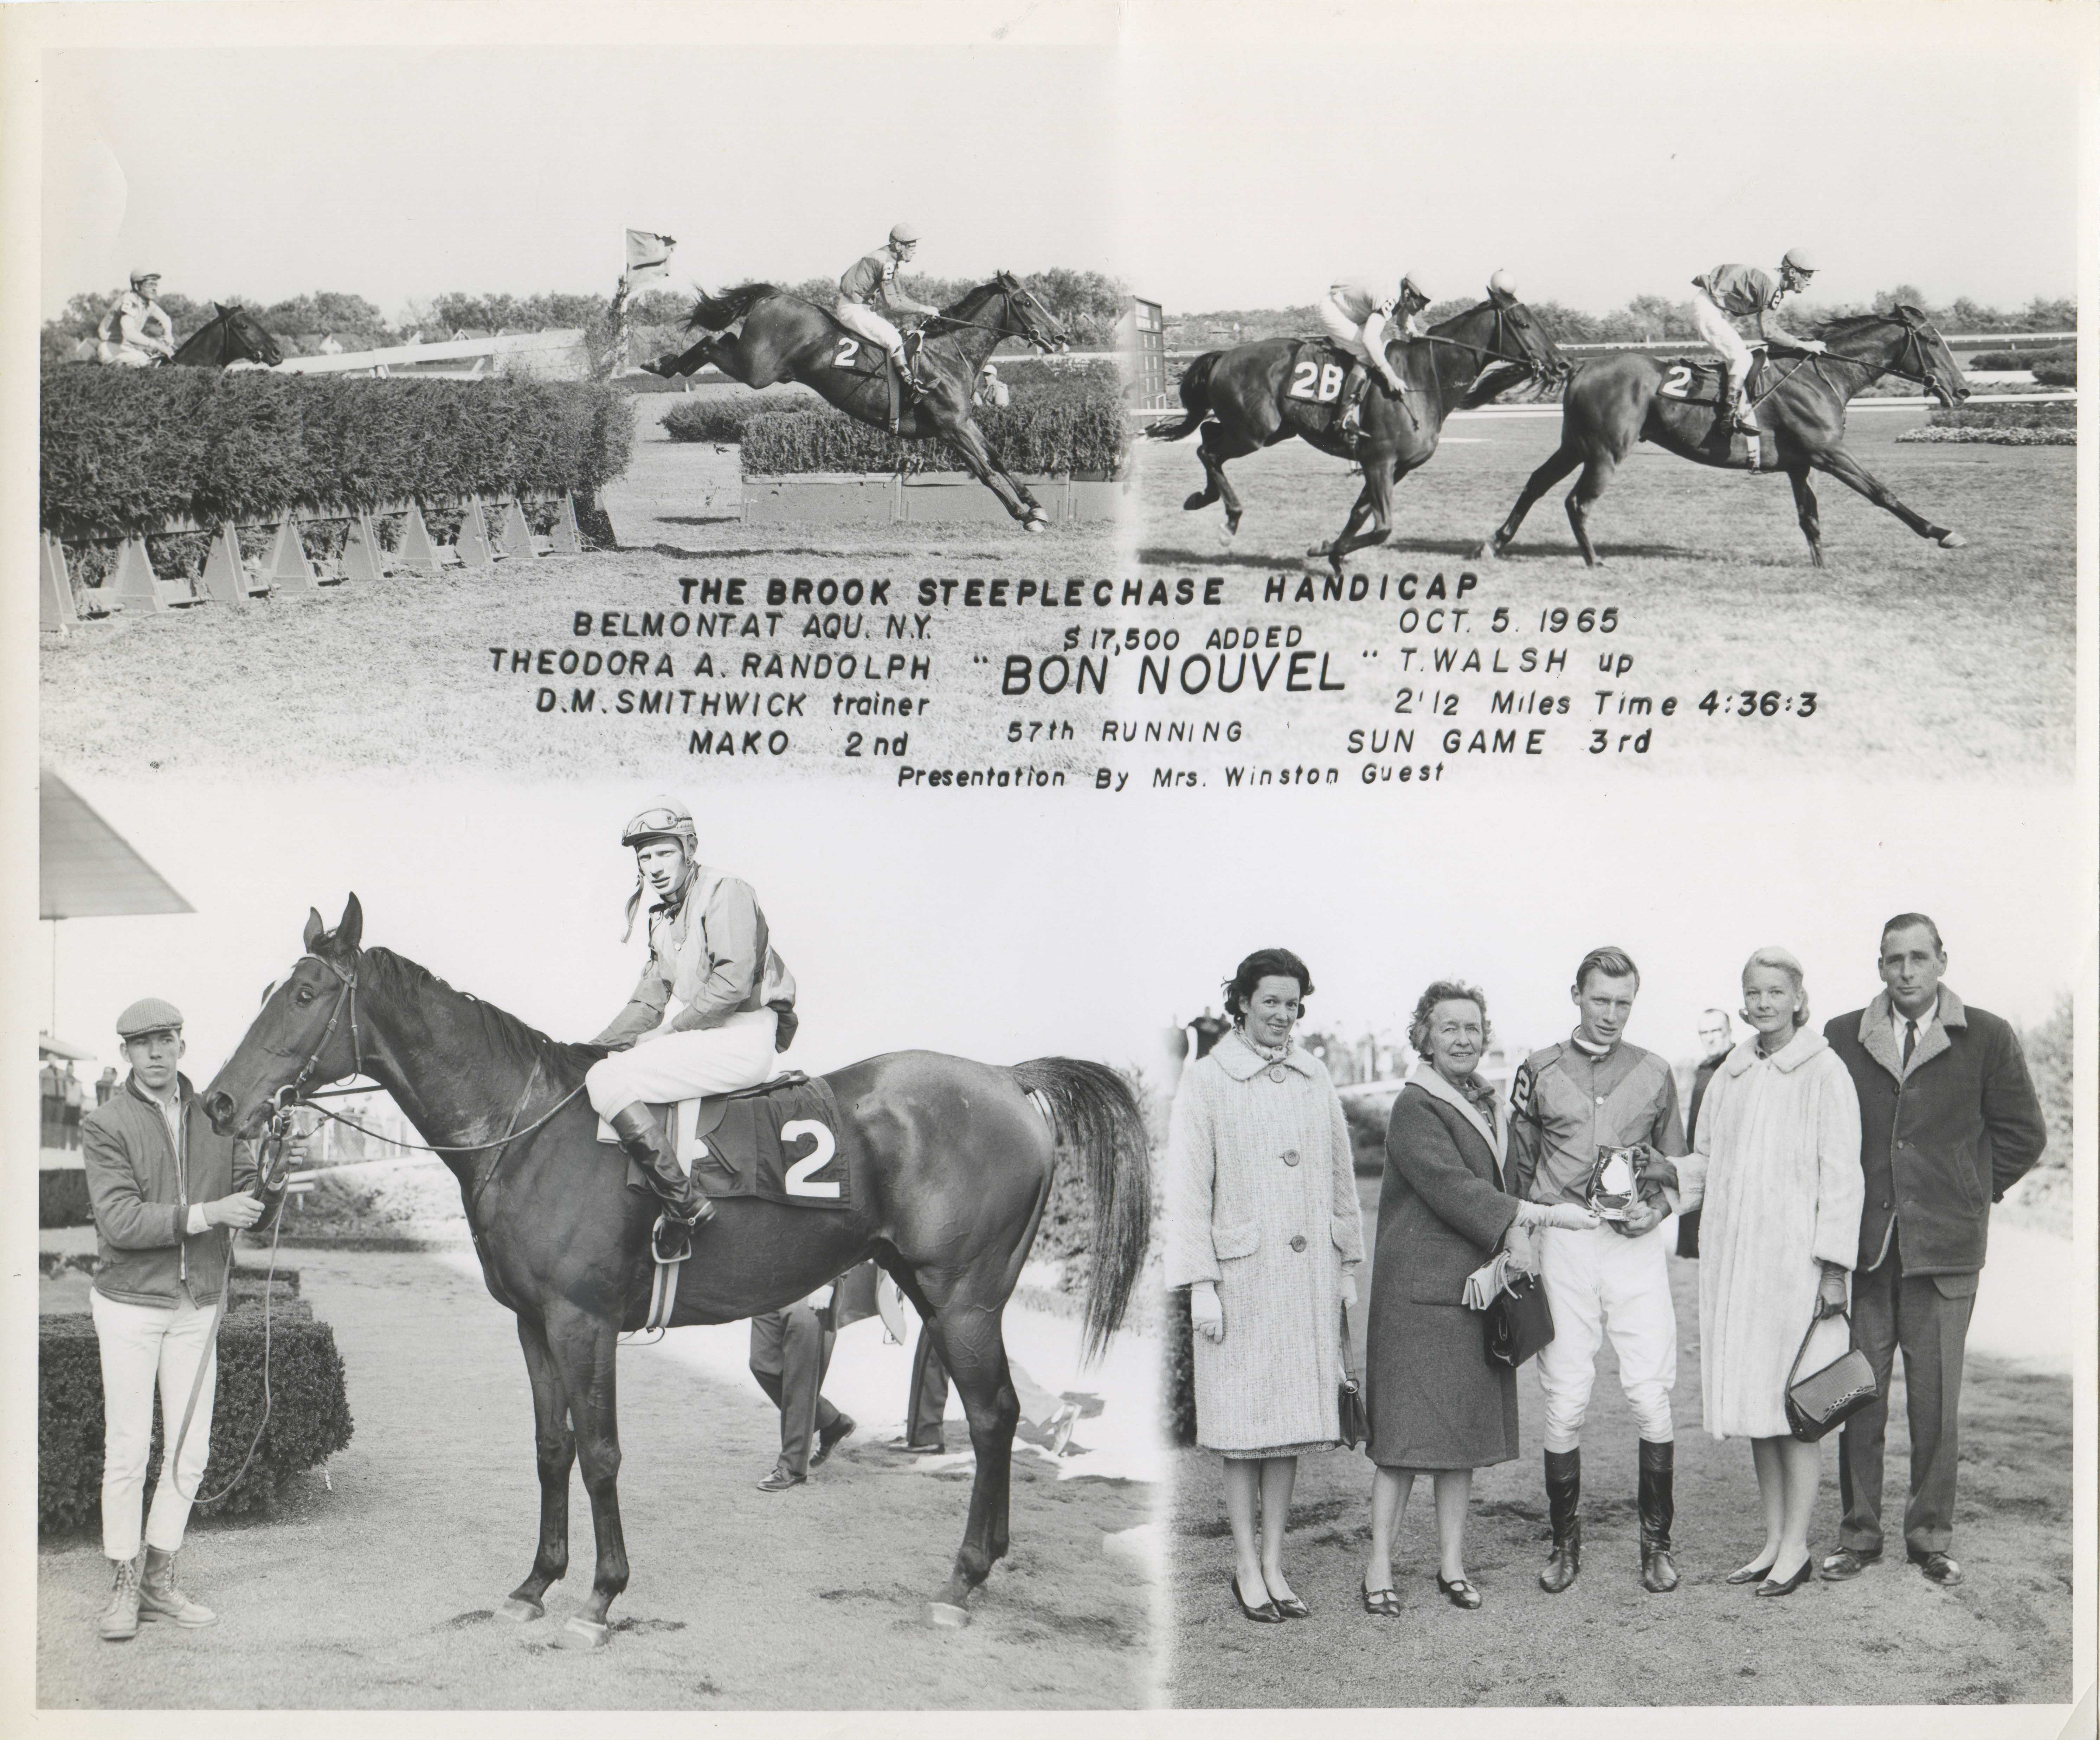 Win composite photograph for the 1965 Brook Steeplechase Handicap at the Belmont at Aqueduct meet (NYRA/Museum Collection)